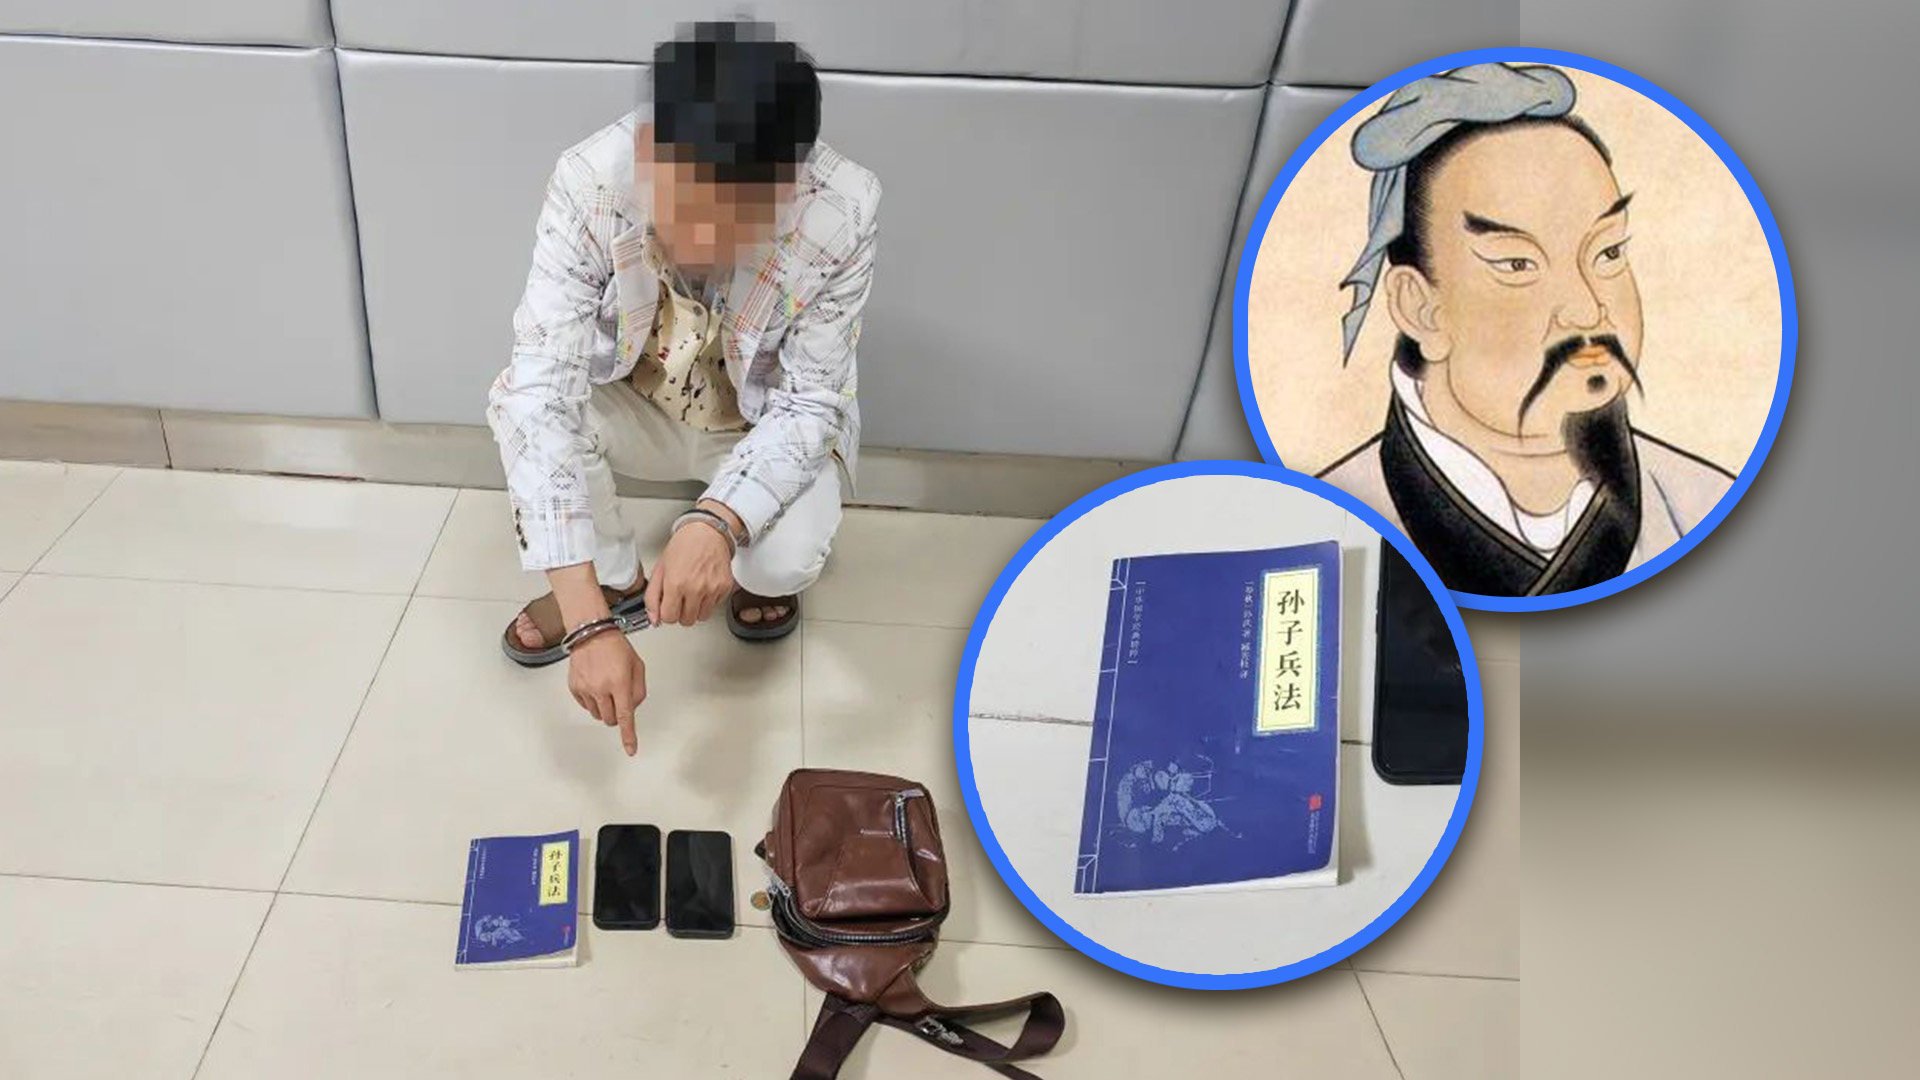 A man in China who tried to sneak out of the country to find illegal work abroad was so scared about the potential dangers ahead that he carried a copy of Sun Tzu’s Art of War with him for survival tips. Photo: SCMP composite/Weibo/Wikipedia